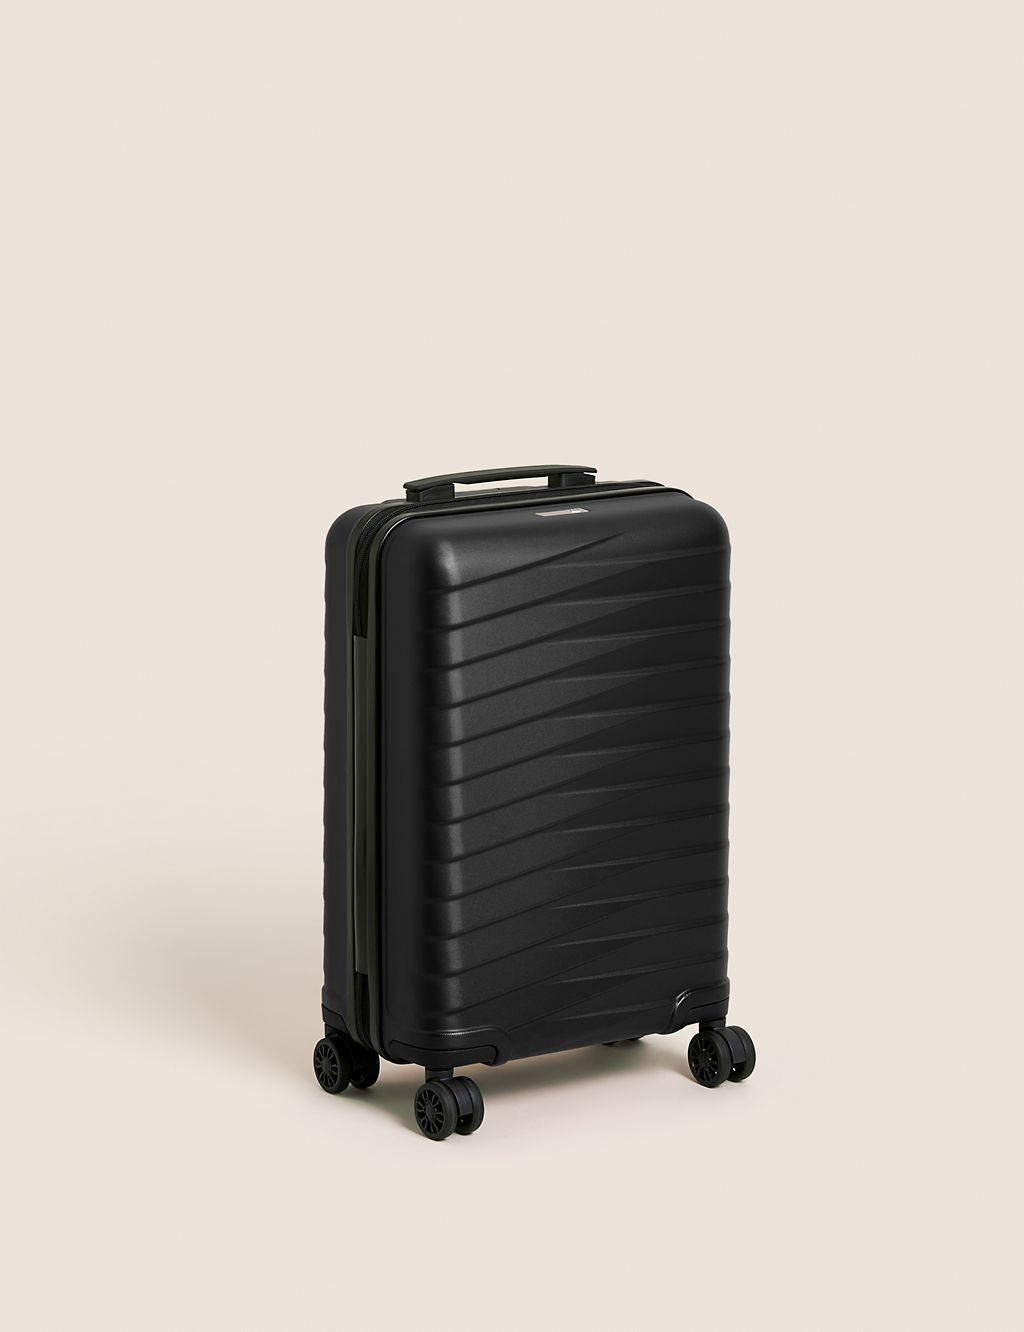 Oslo 4 Wheel Hard Shell Cabin Suitcase, M&S Collection